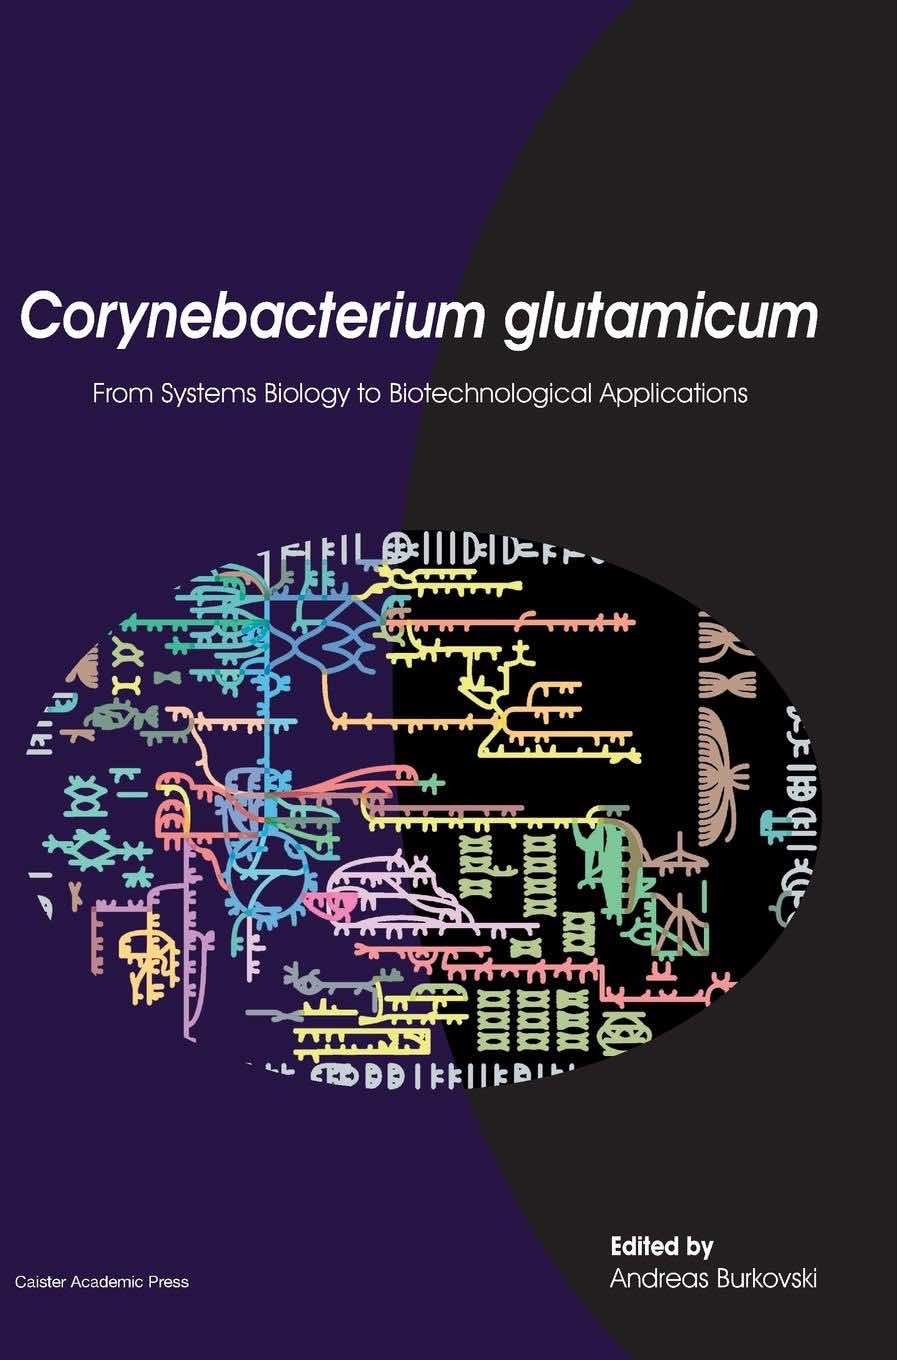 Corynebacterium glutamicum: From Systems Biology to Biotechnological Applications